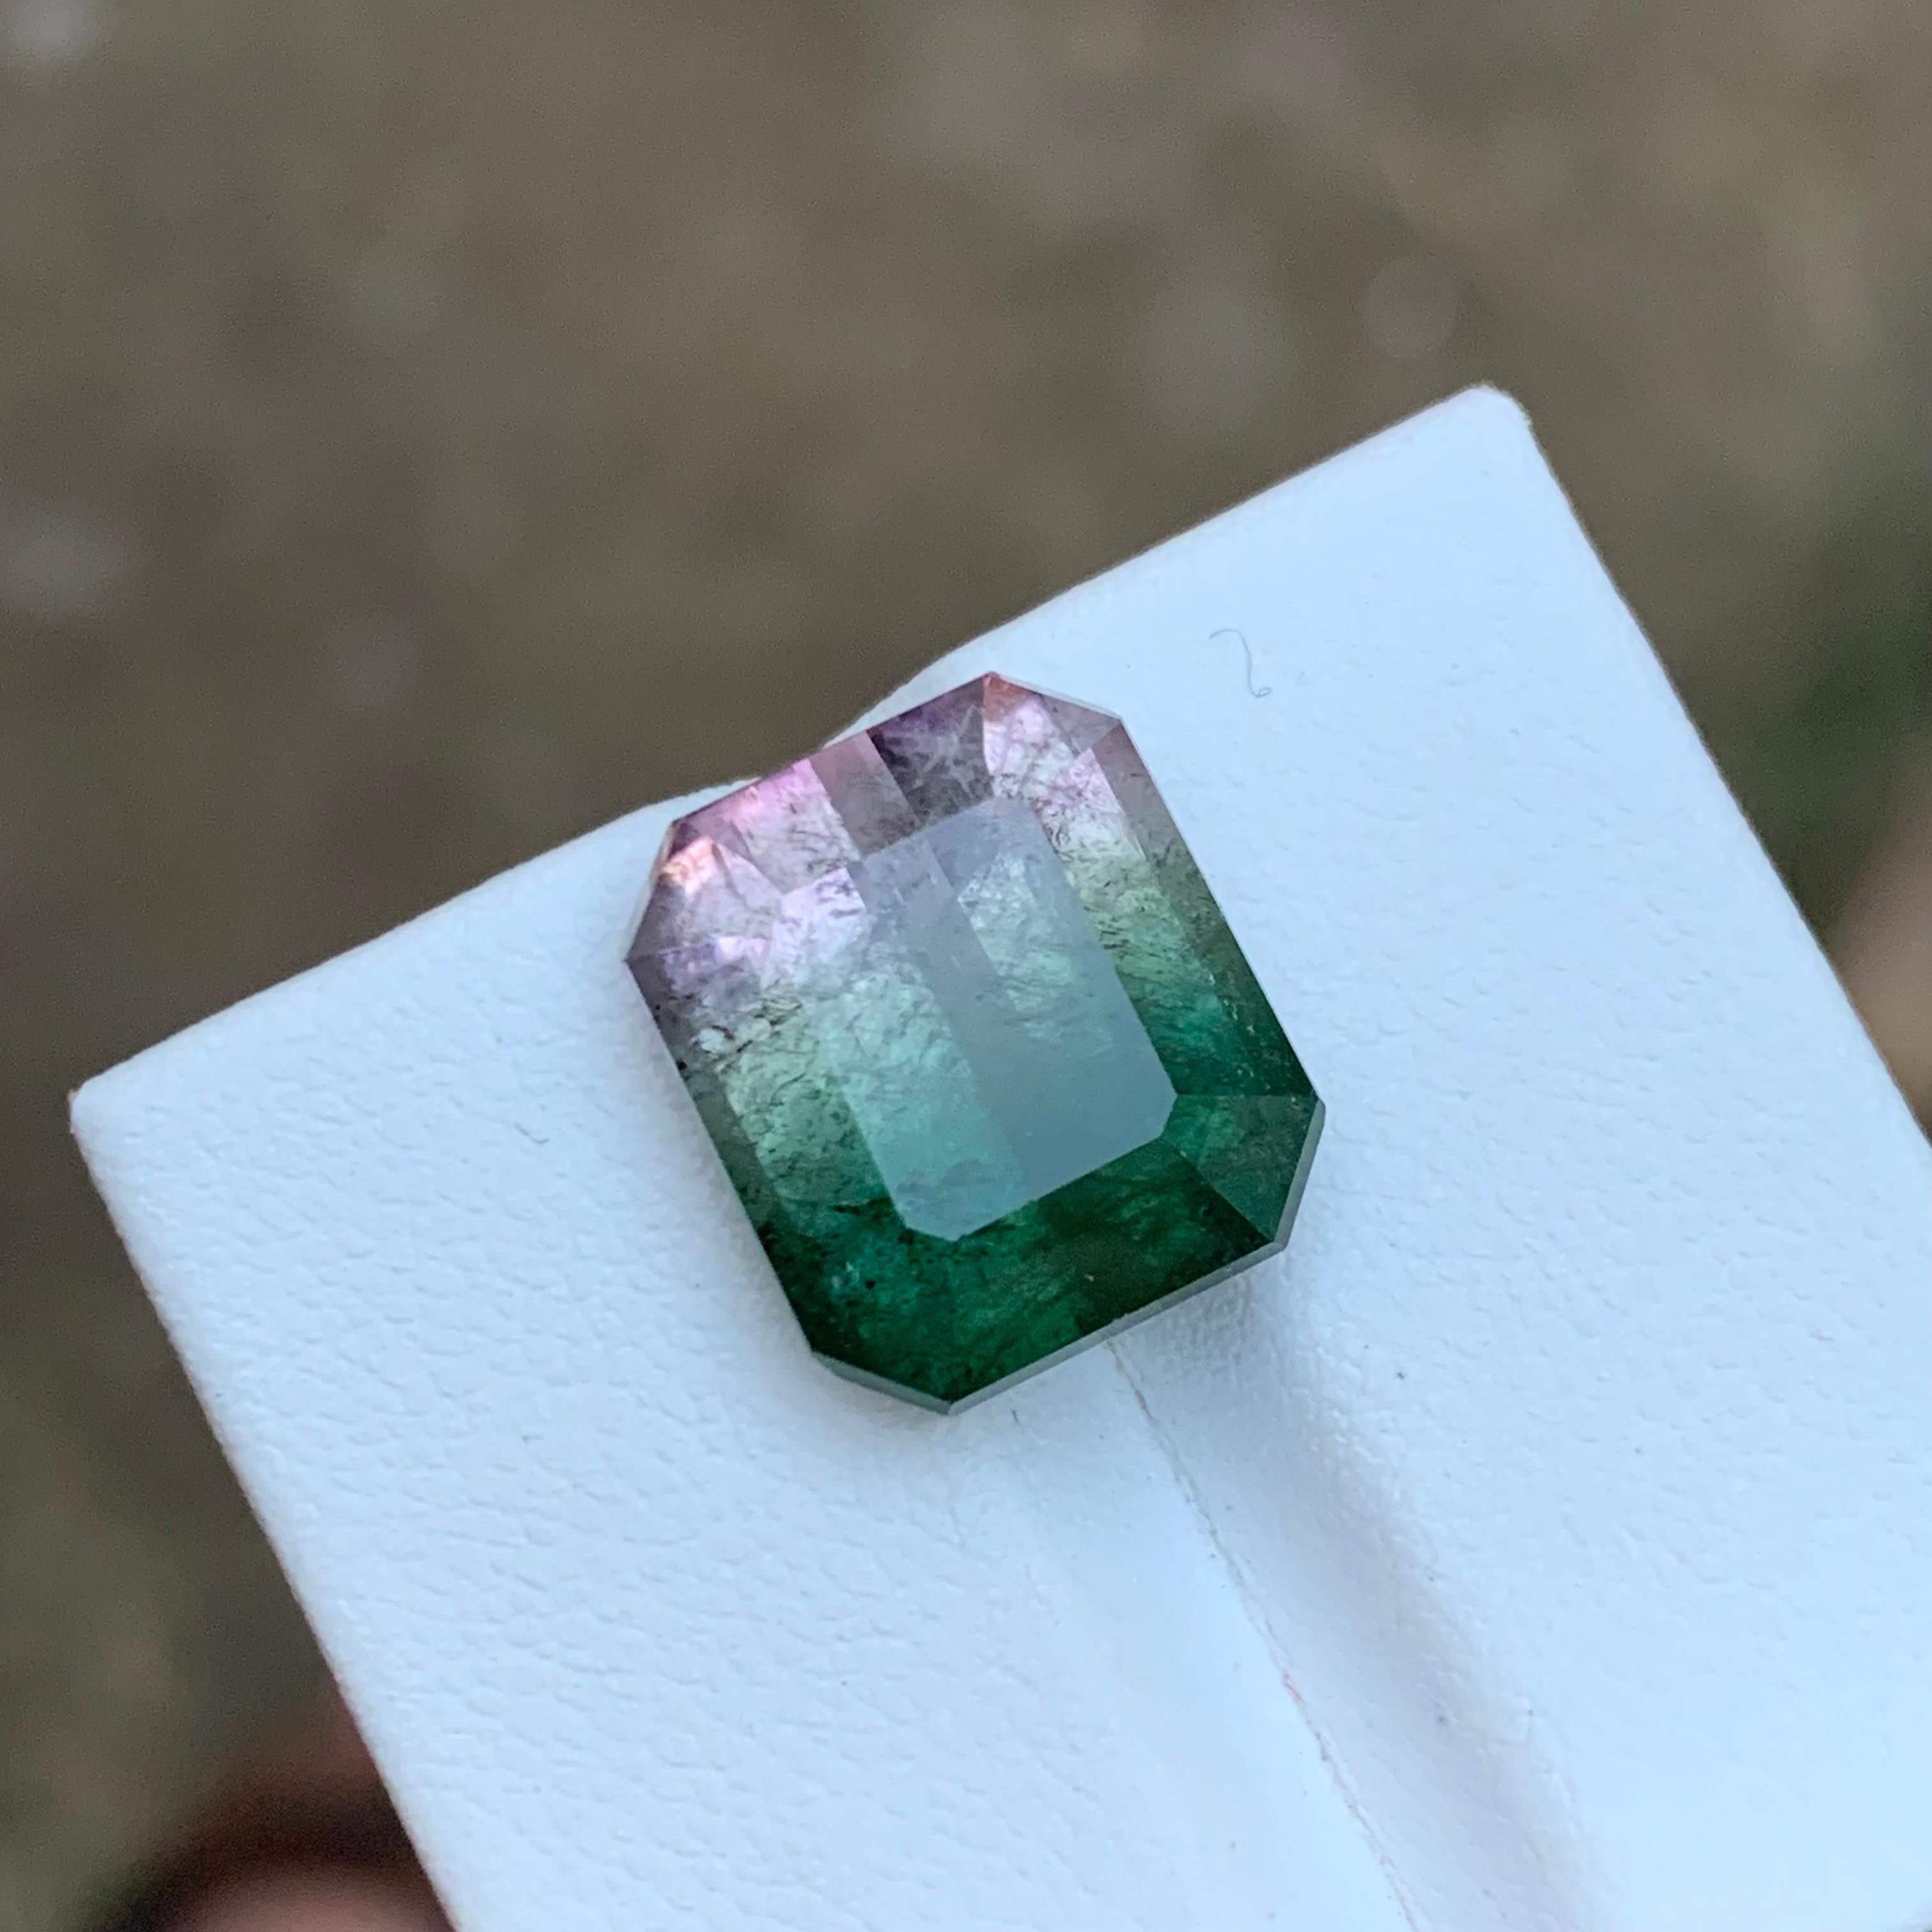 GEMSTONE TYPE: Tourmaline
PIECE(S): 1
WEIGHT: 11.90 Carat
SHAPE: Emerald
SIZE (MM): 14.08 x 12.05 x 8.10
COLOR: Watermelon Bicolor Bluish Green & Pink
CLARITY: Slightly Included-II
TREATMENT: Heated
ORIGIN: Afghanistan
CERTIFICATE: On